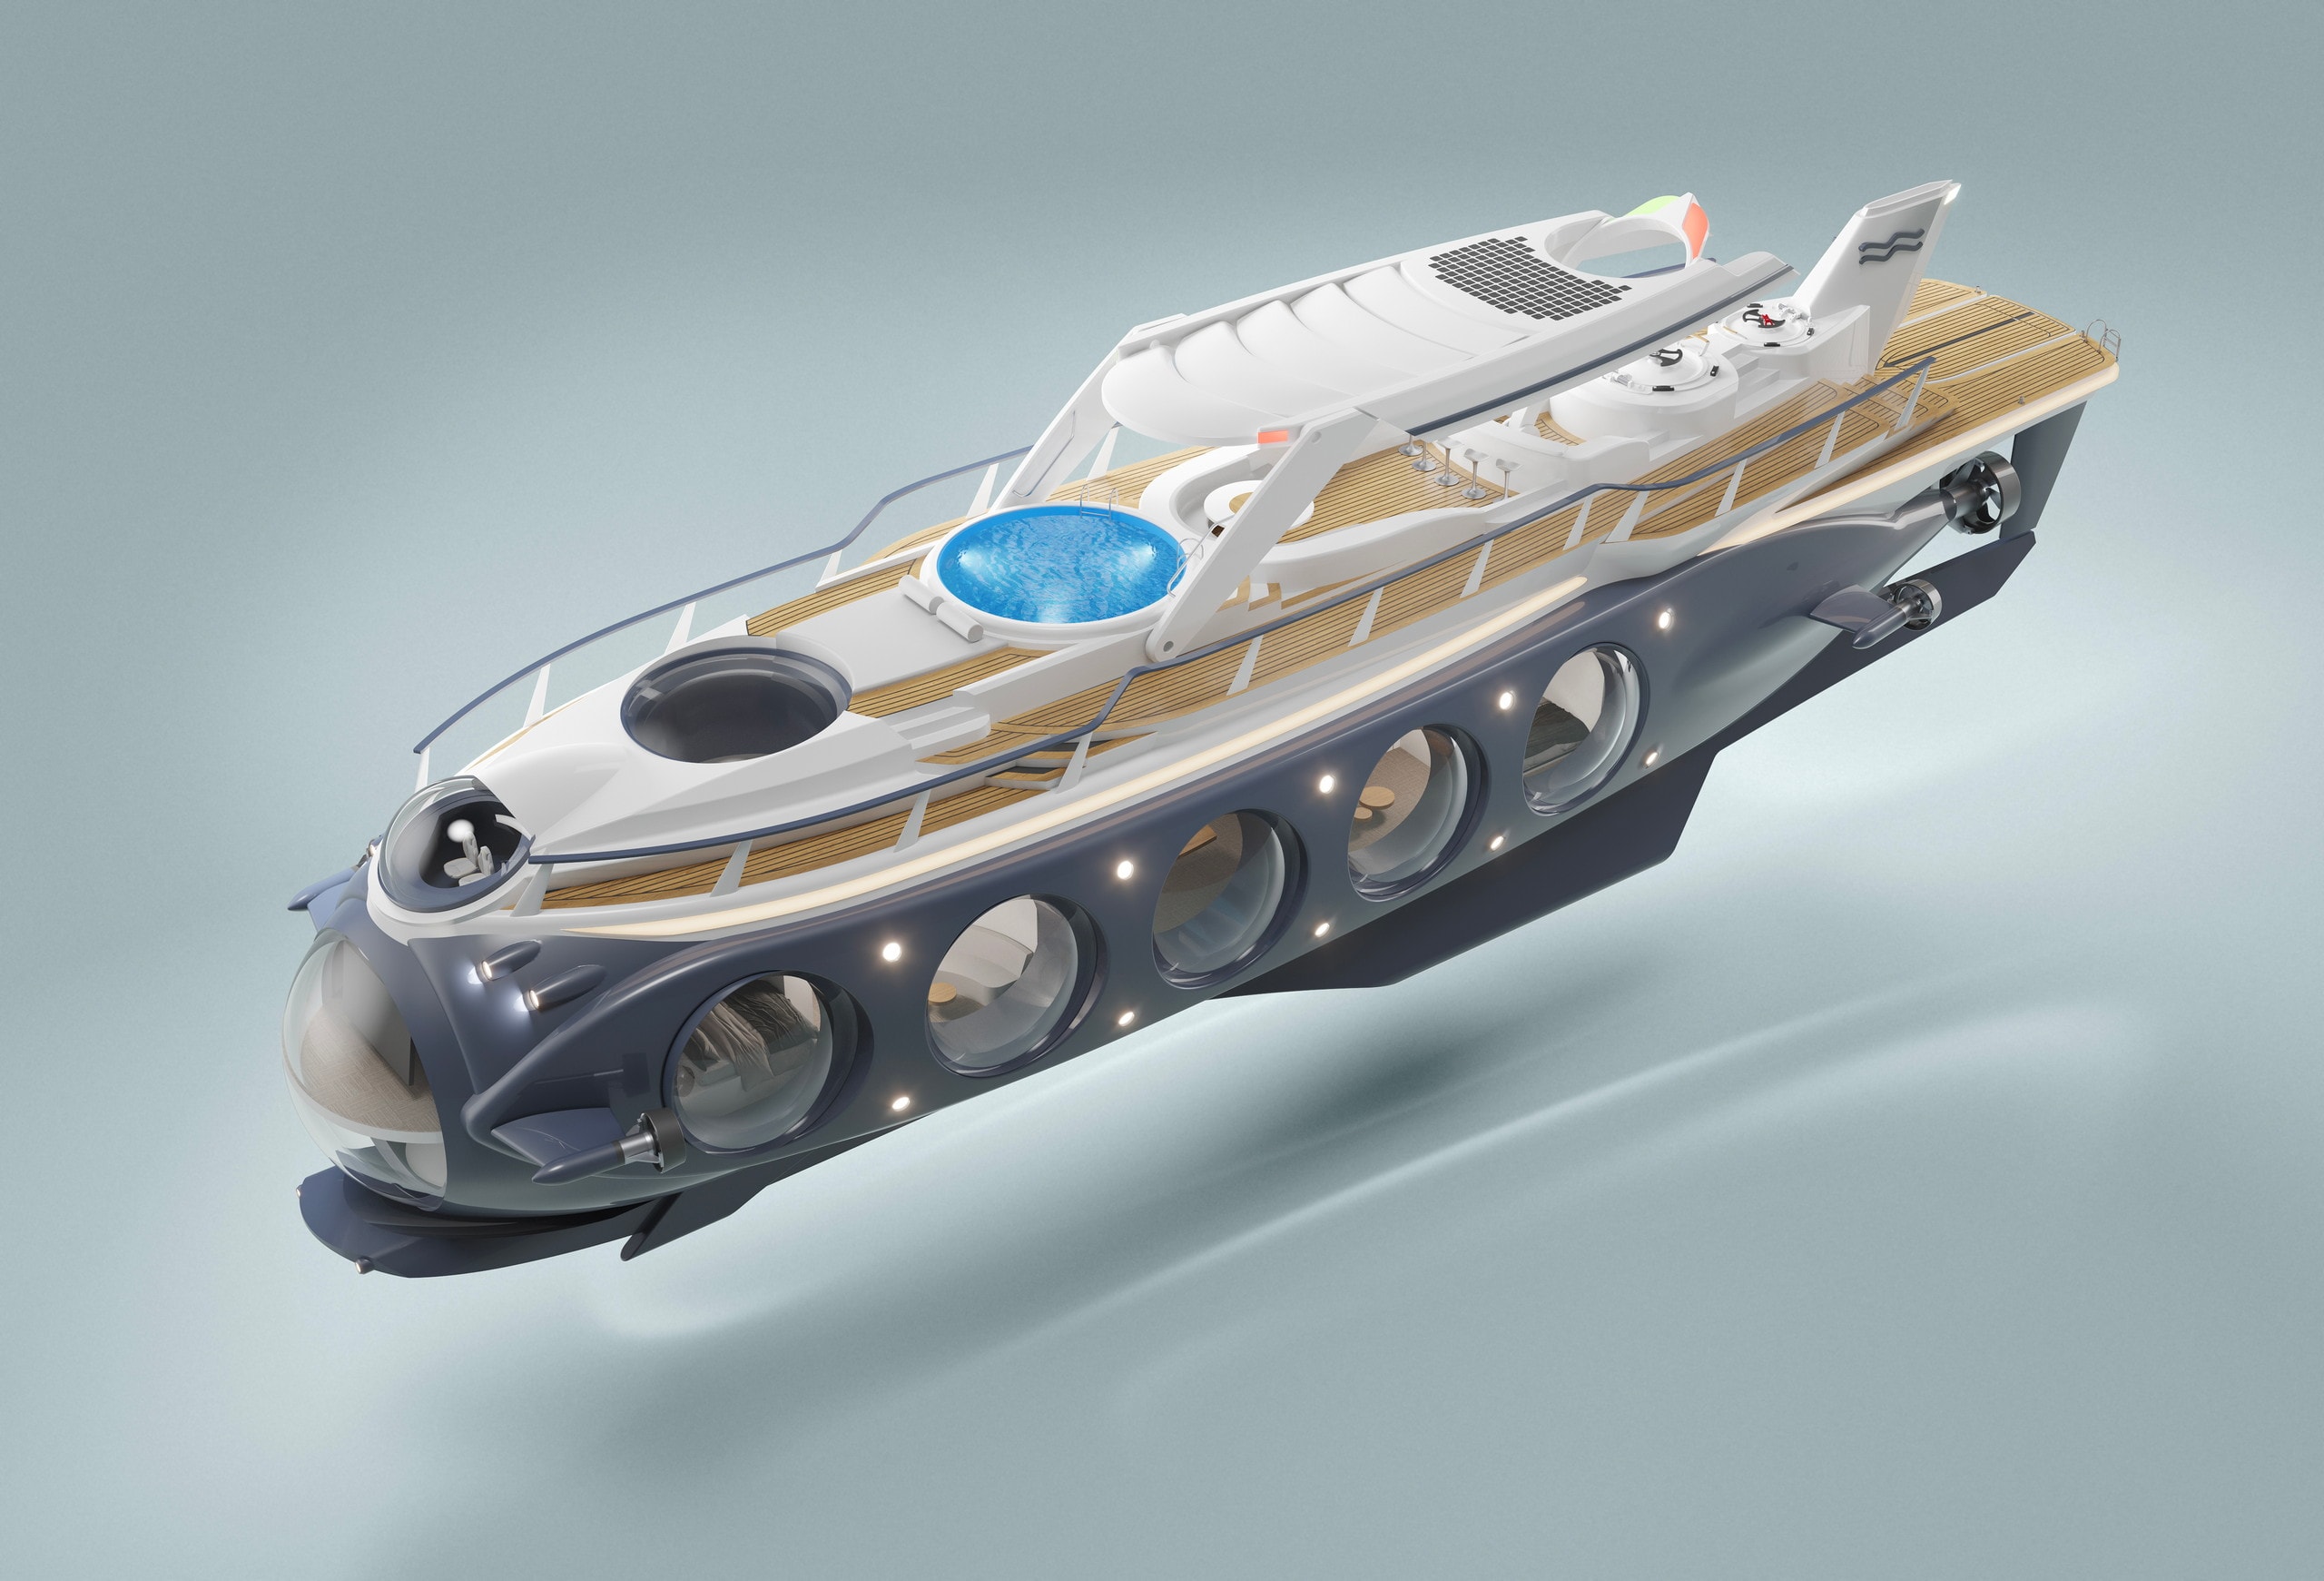 The Real Nautilus Can Turn From a Yacht Into a Submarine, Better